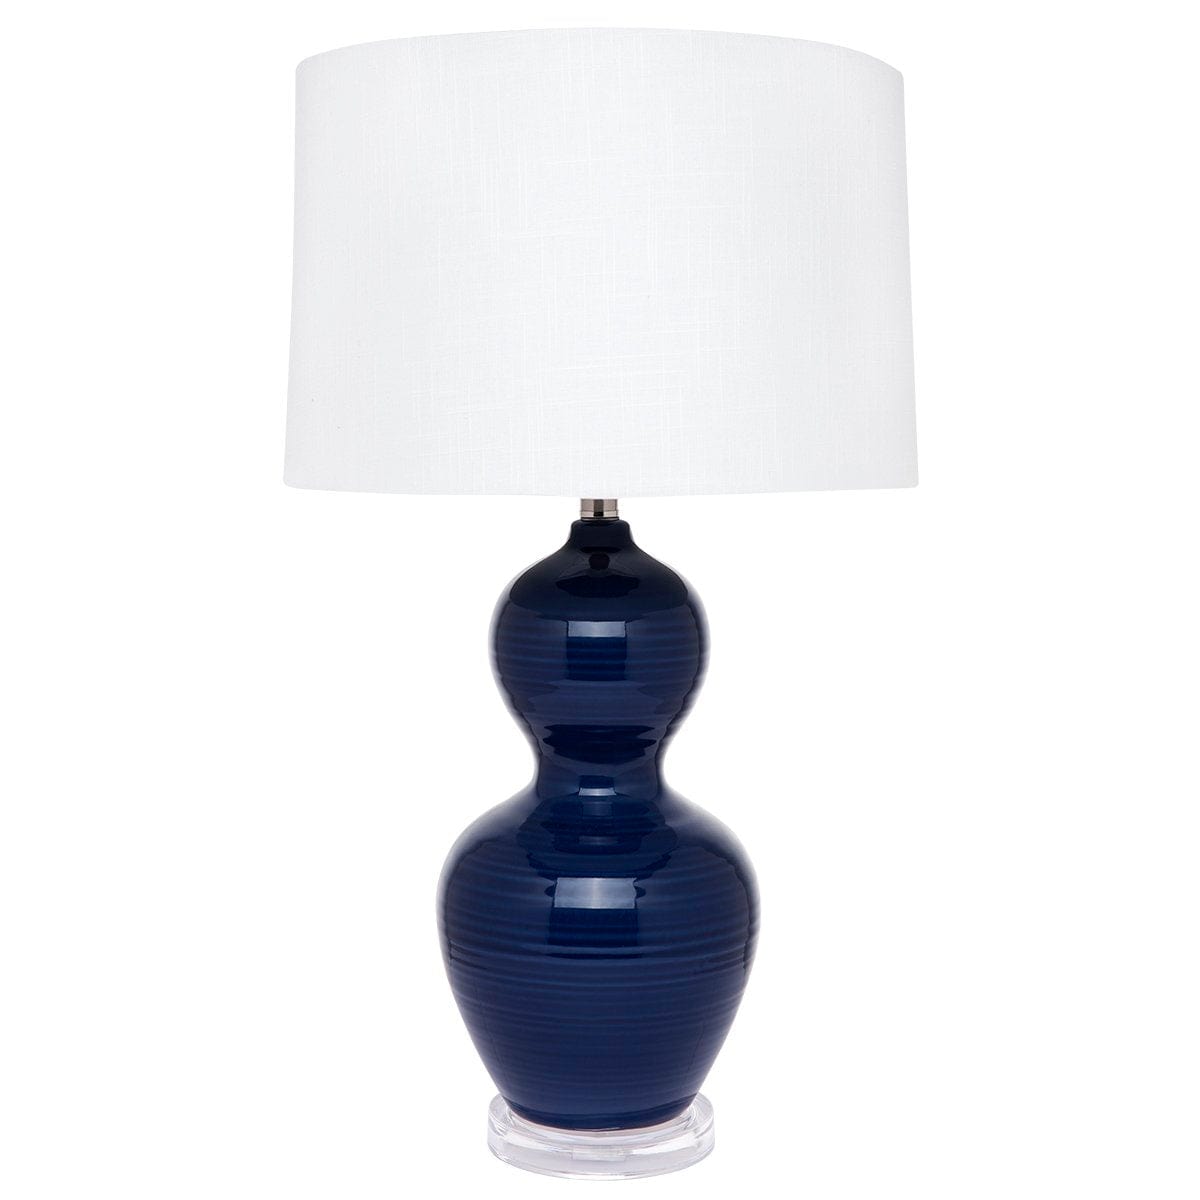 CAFE LIGHTING & LIVING Table Lamp Bronte Table Lamp - Blue 11682